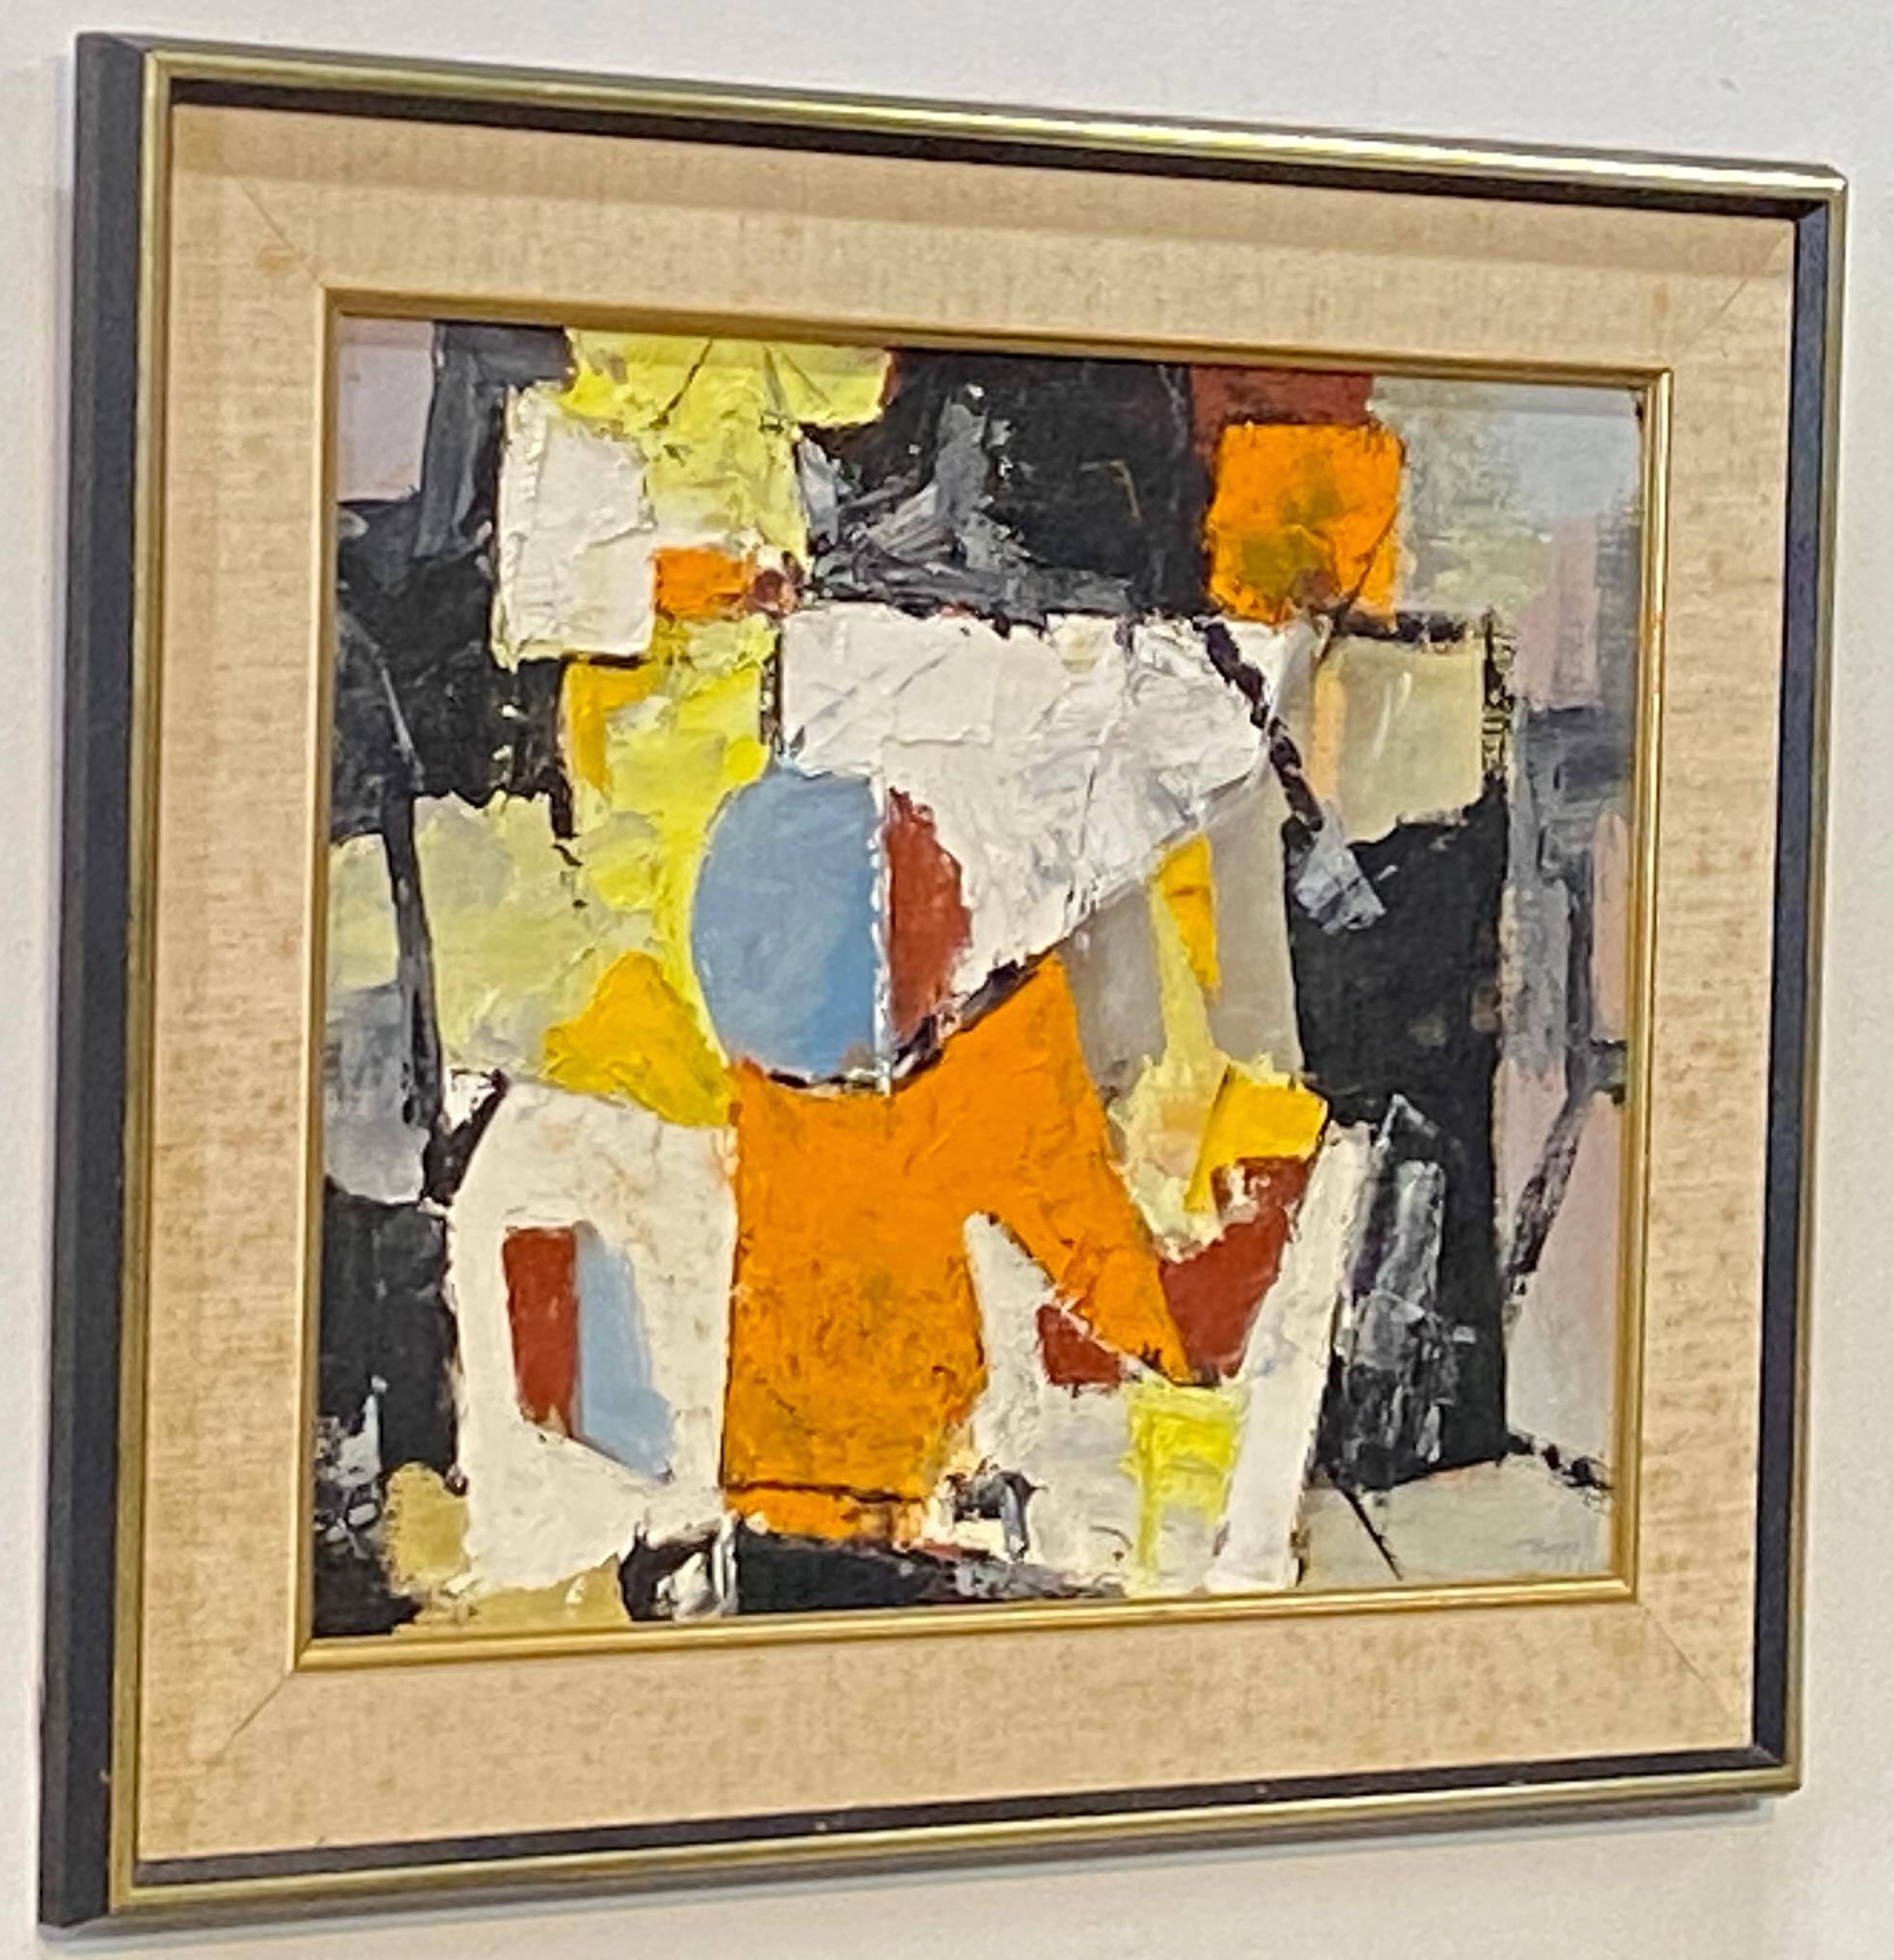 Hand-Painted Mid-Century Modernist Abstract Painting by Charles Ragland Bunnell 1959 For Sale